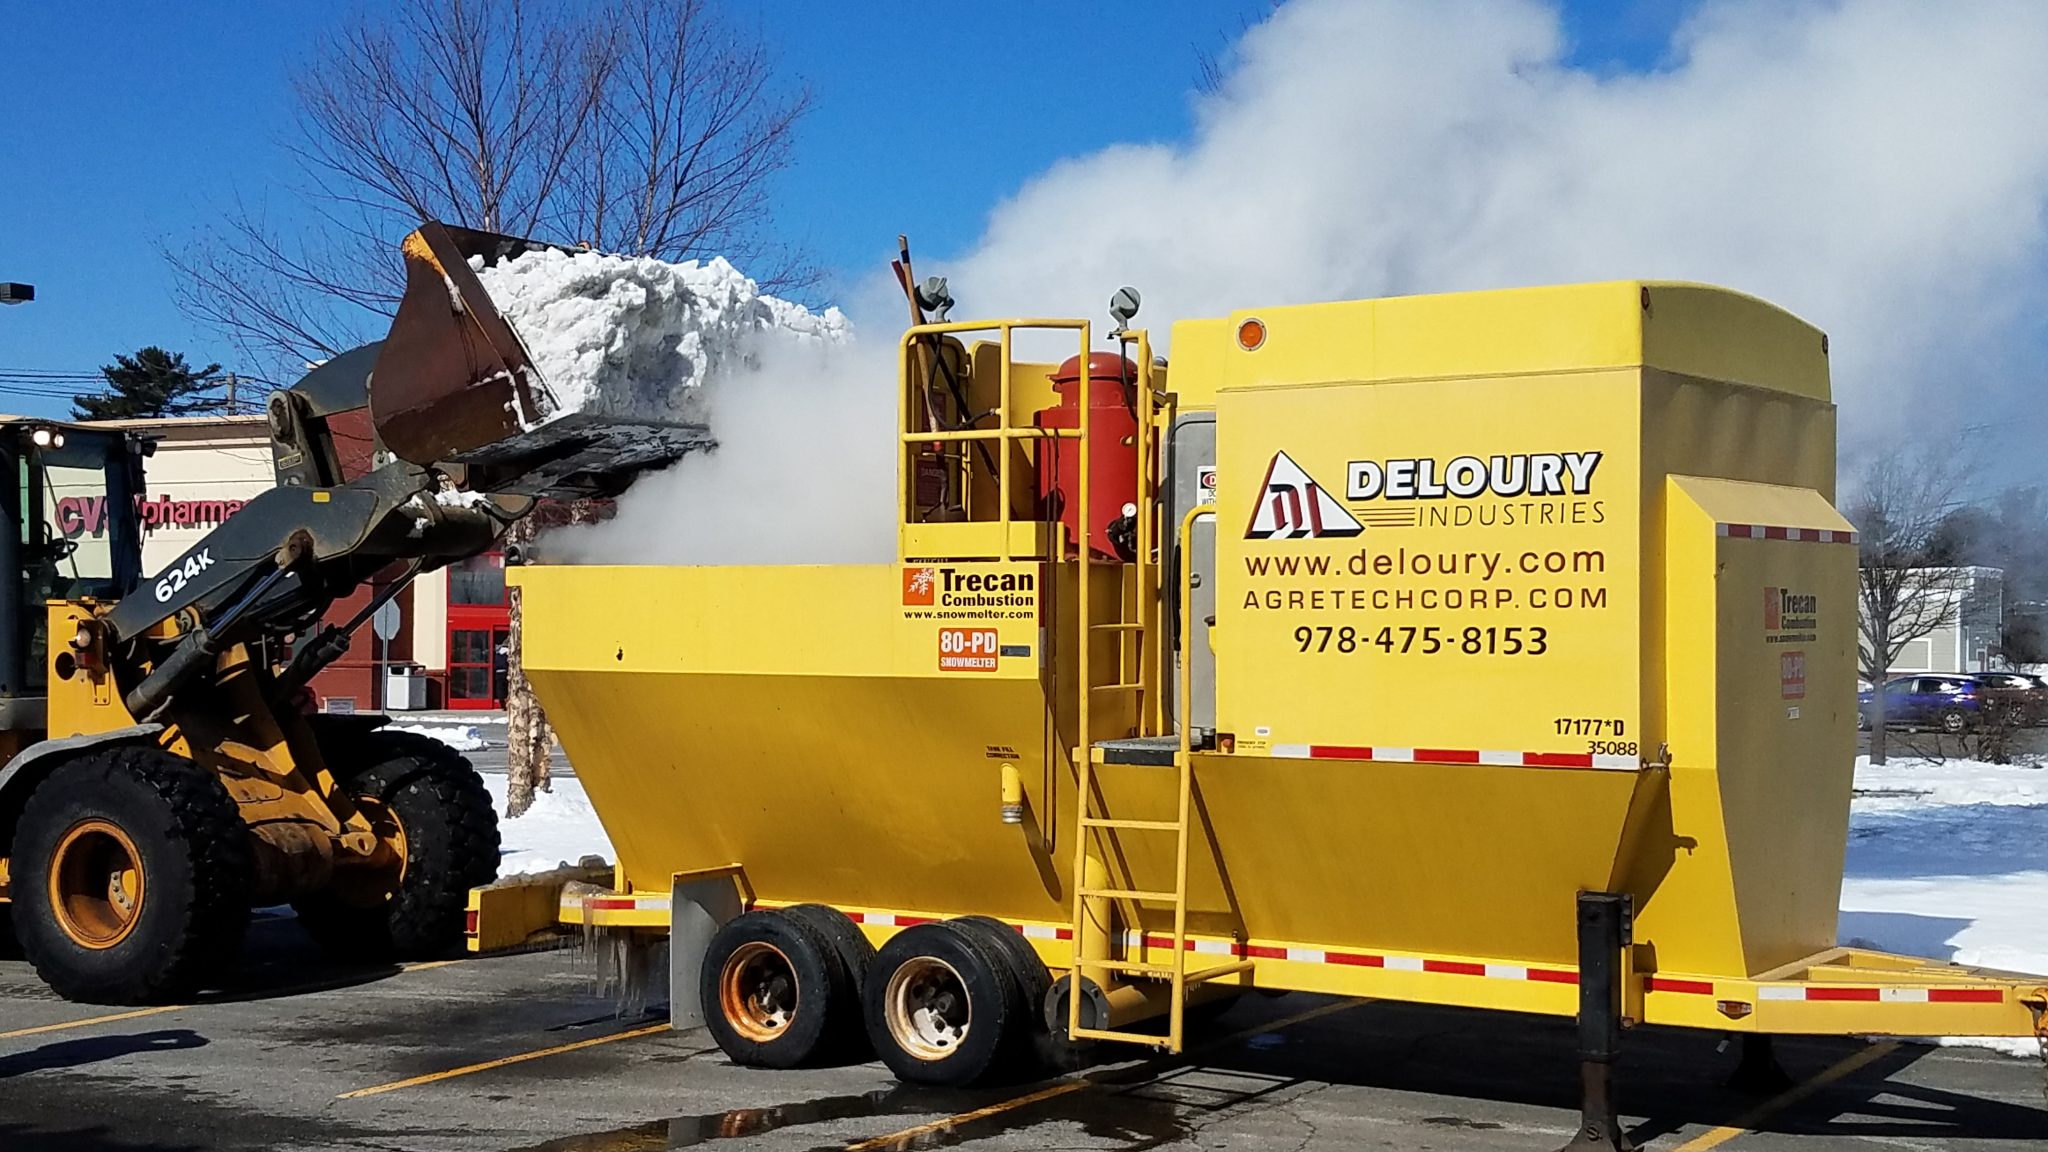 Deloury Snow and Ice Management in Boston, MA